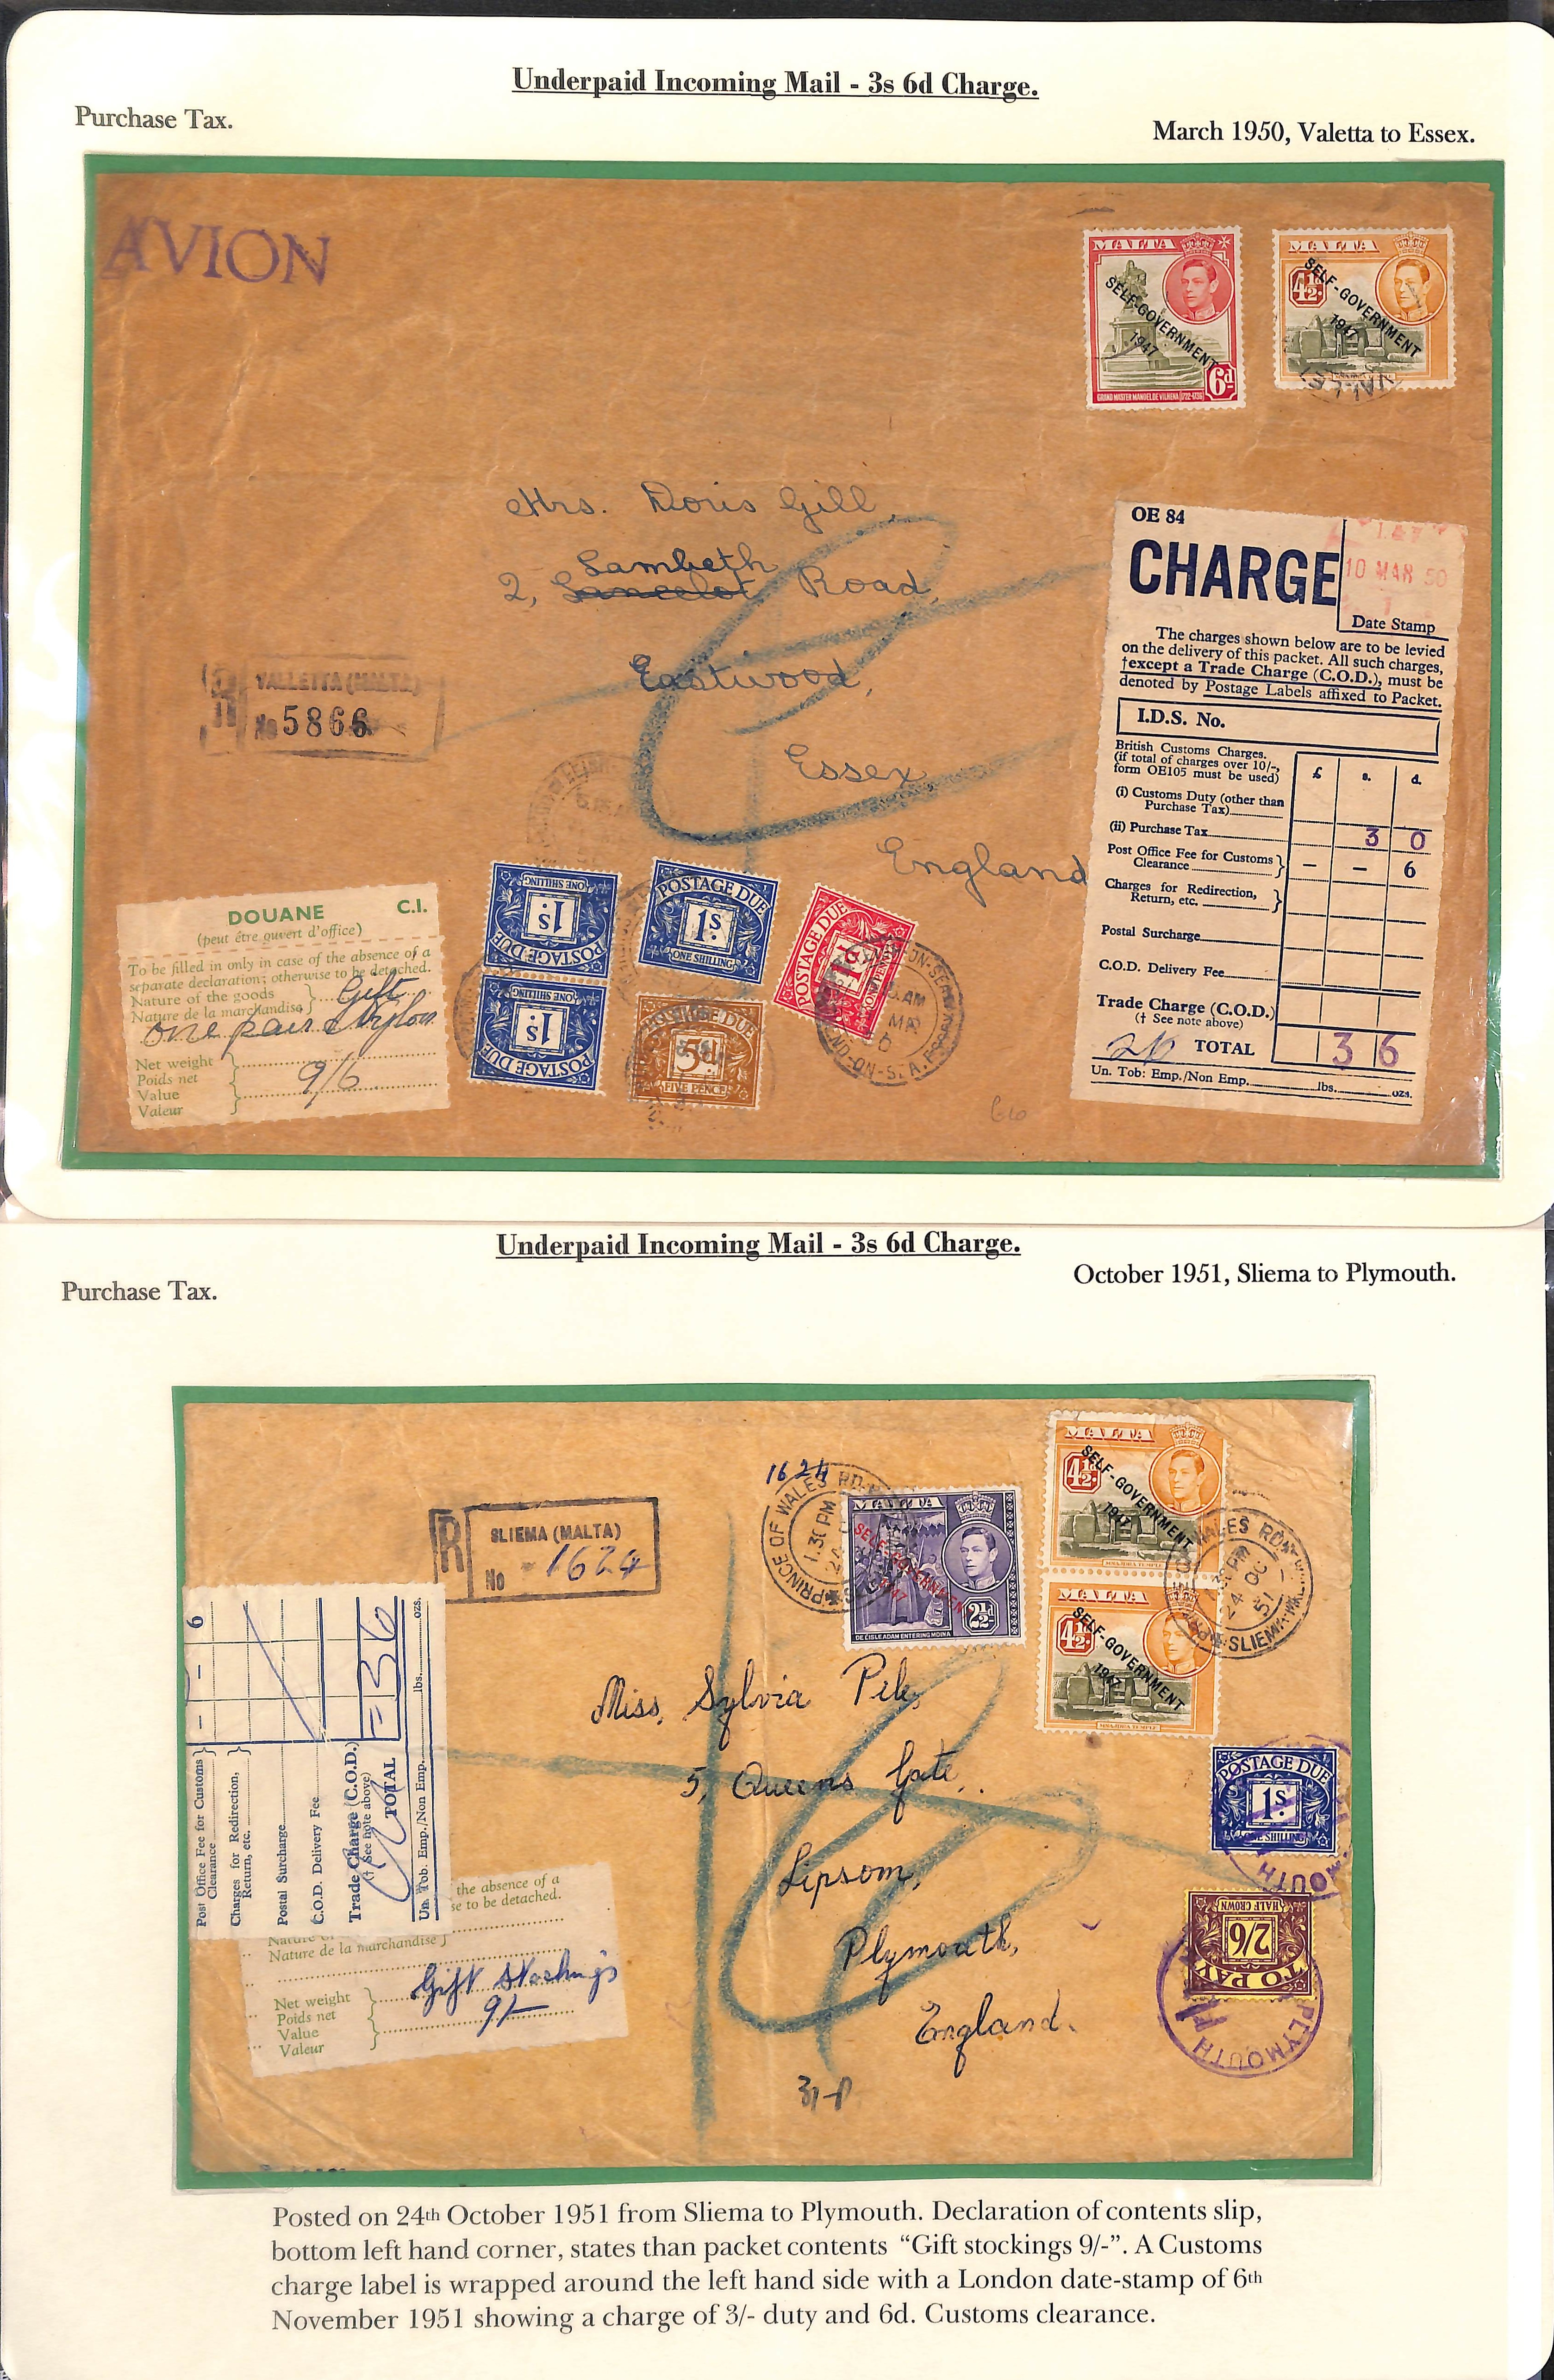 Customs Charges/Accumulated Charges. 1938-92 Covers or parcel address panels with customs duty or - Image 17 of 18